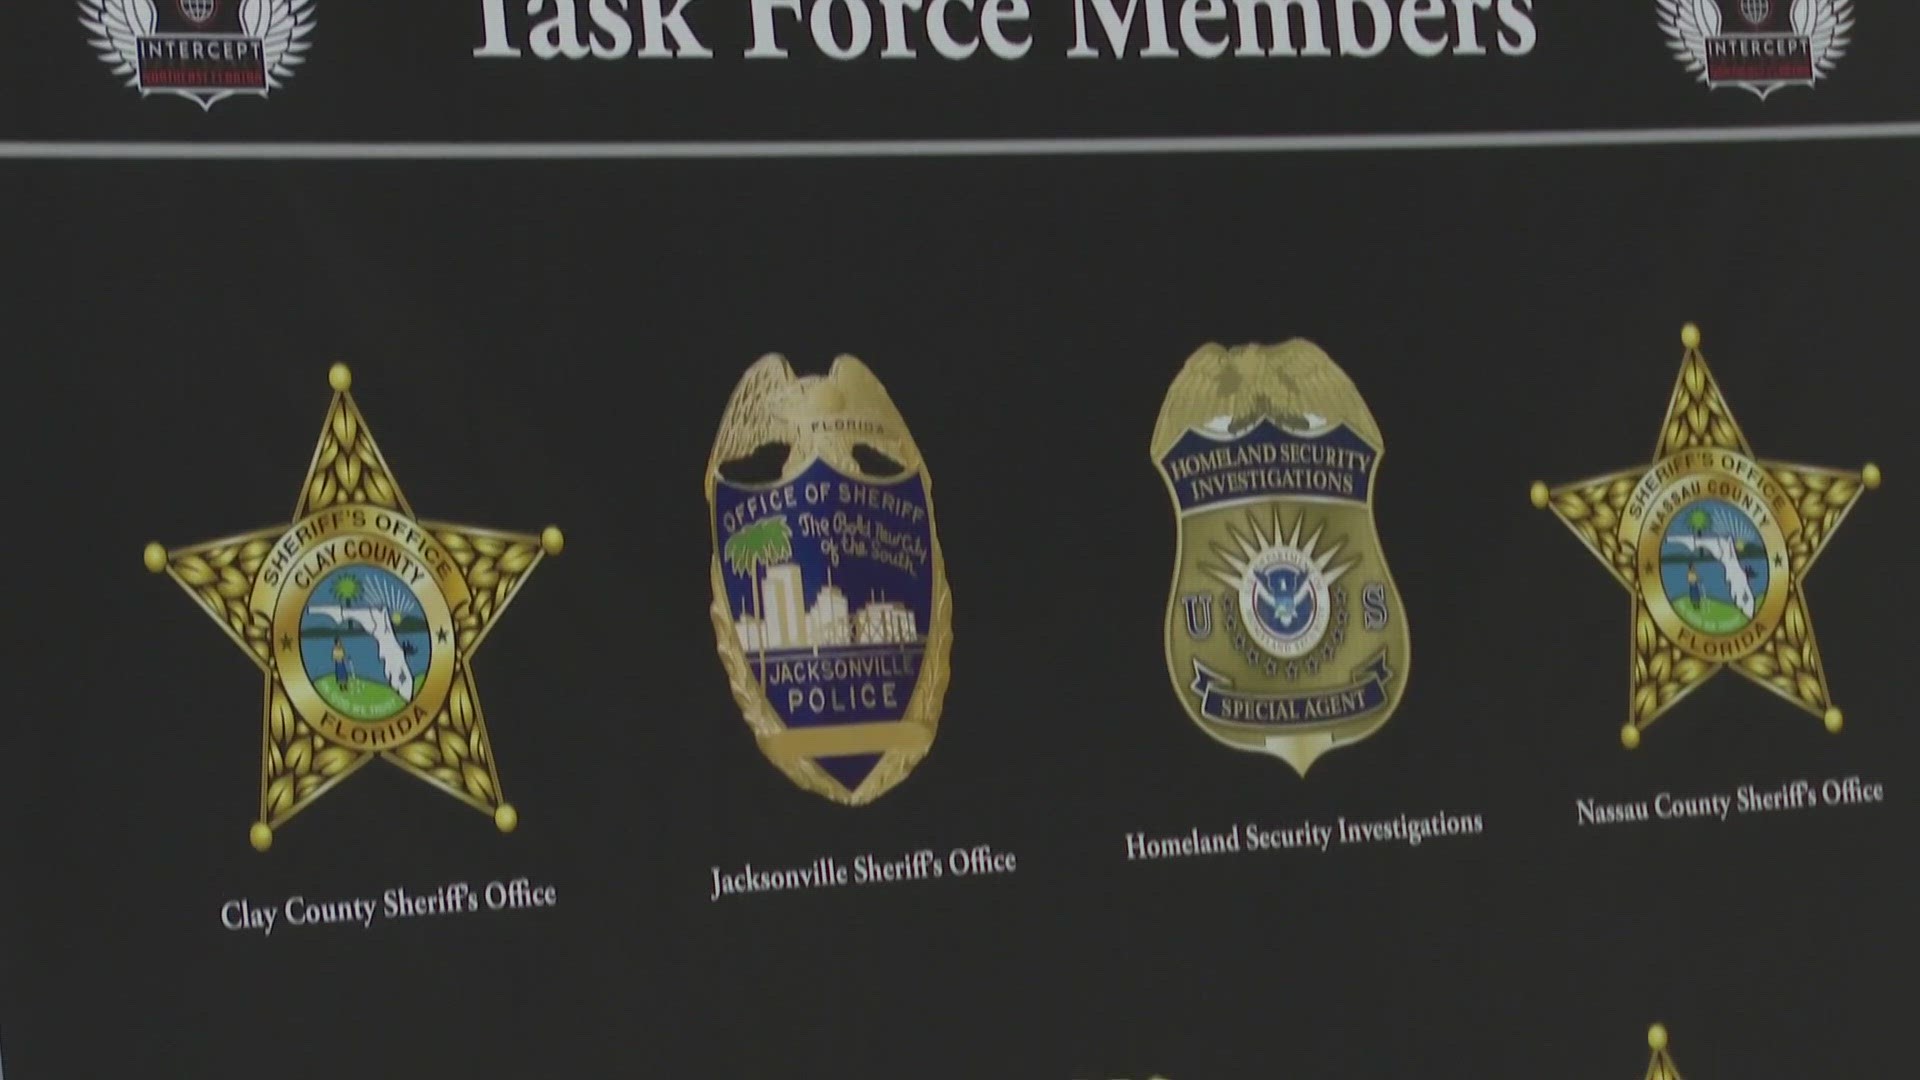 The task force is comprised of seven agencies across five counties in Northeast Florida.